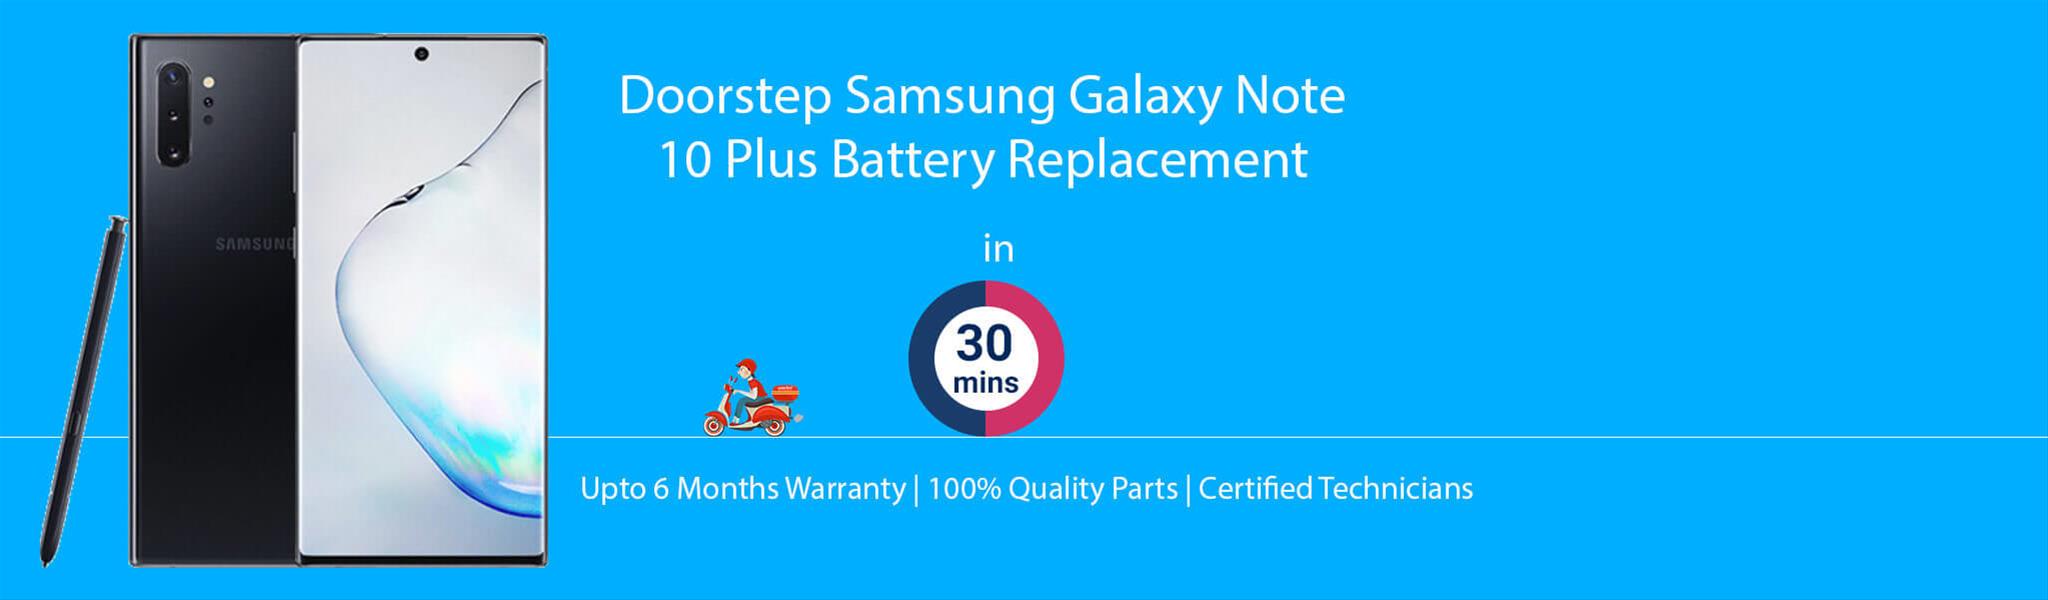 samsung-galaxy-note-10-plus-battery-replacement.jpg